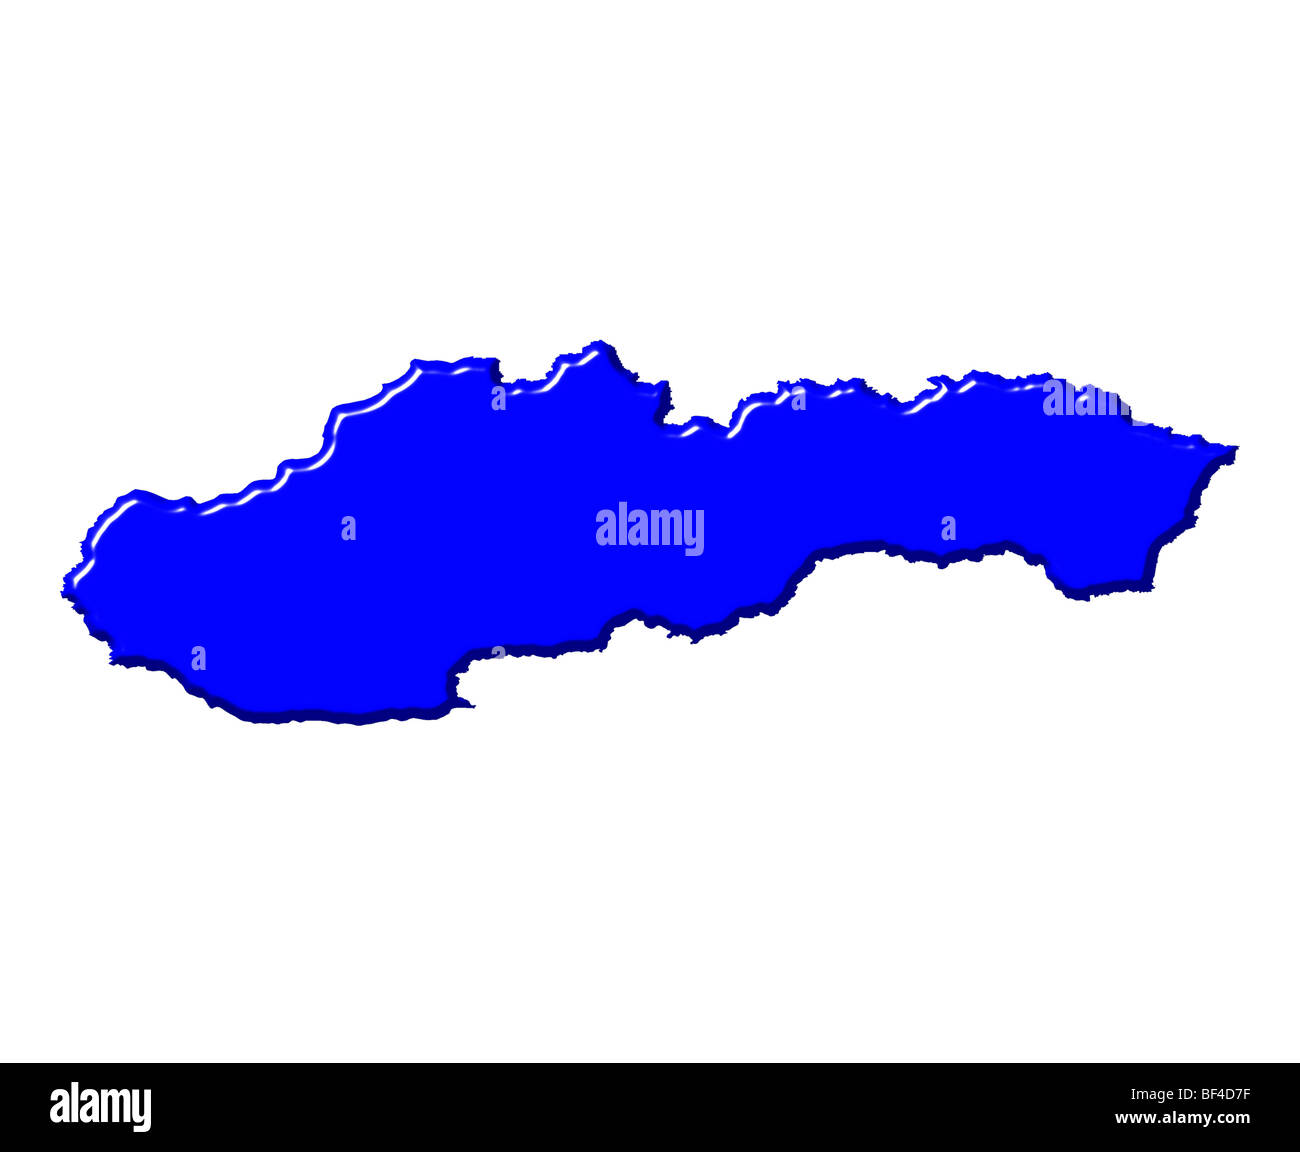 Slovakia 3d map with national color Stock Photo